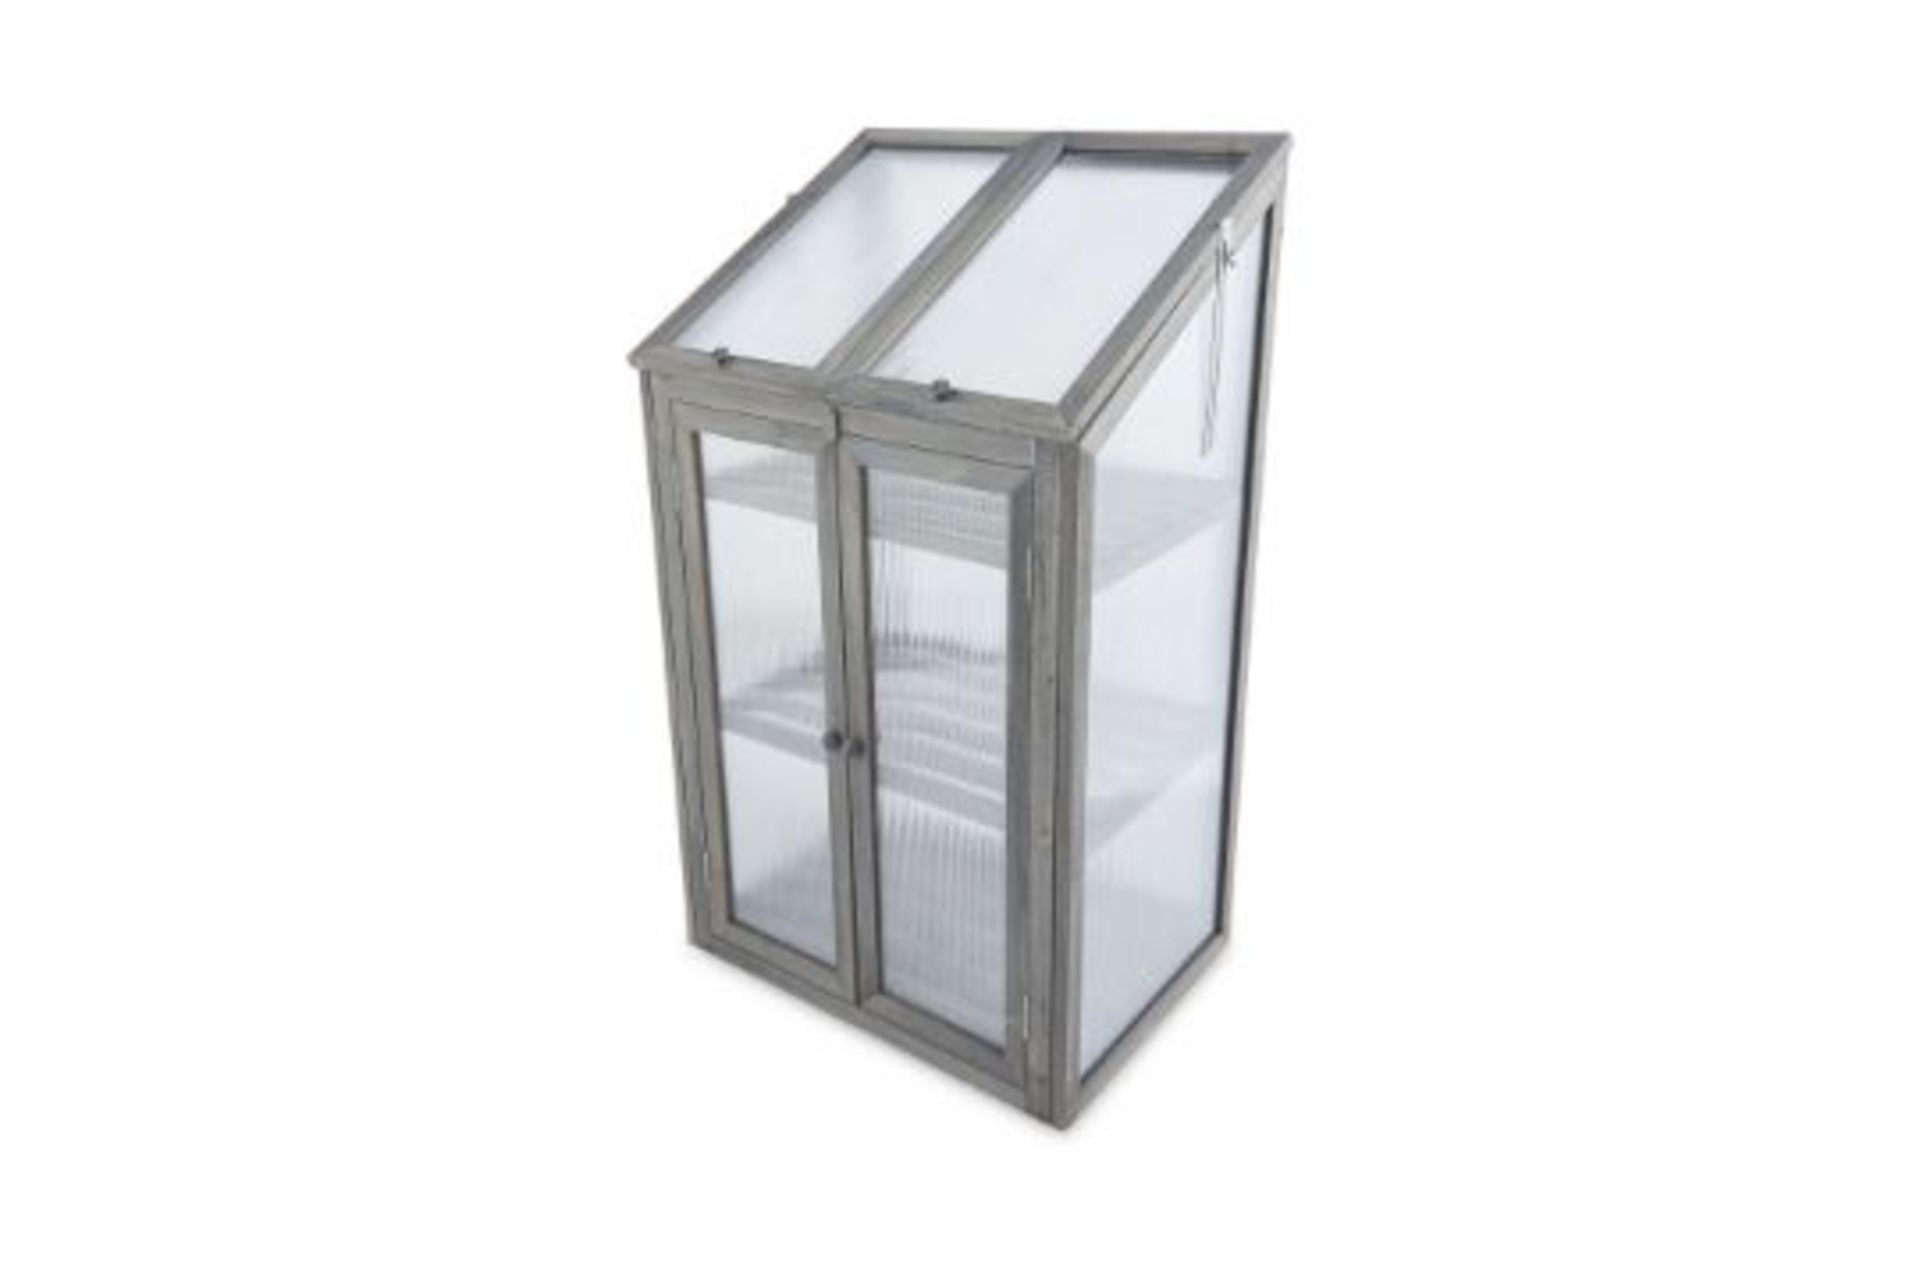 2 x Grey Wooden Mini Greenhouse. Made from 100% sustainable fir wood, this Grey Wooden Mini